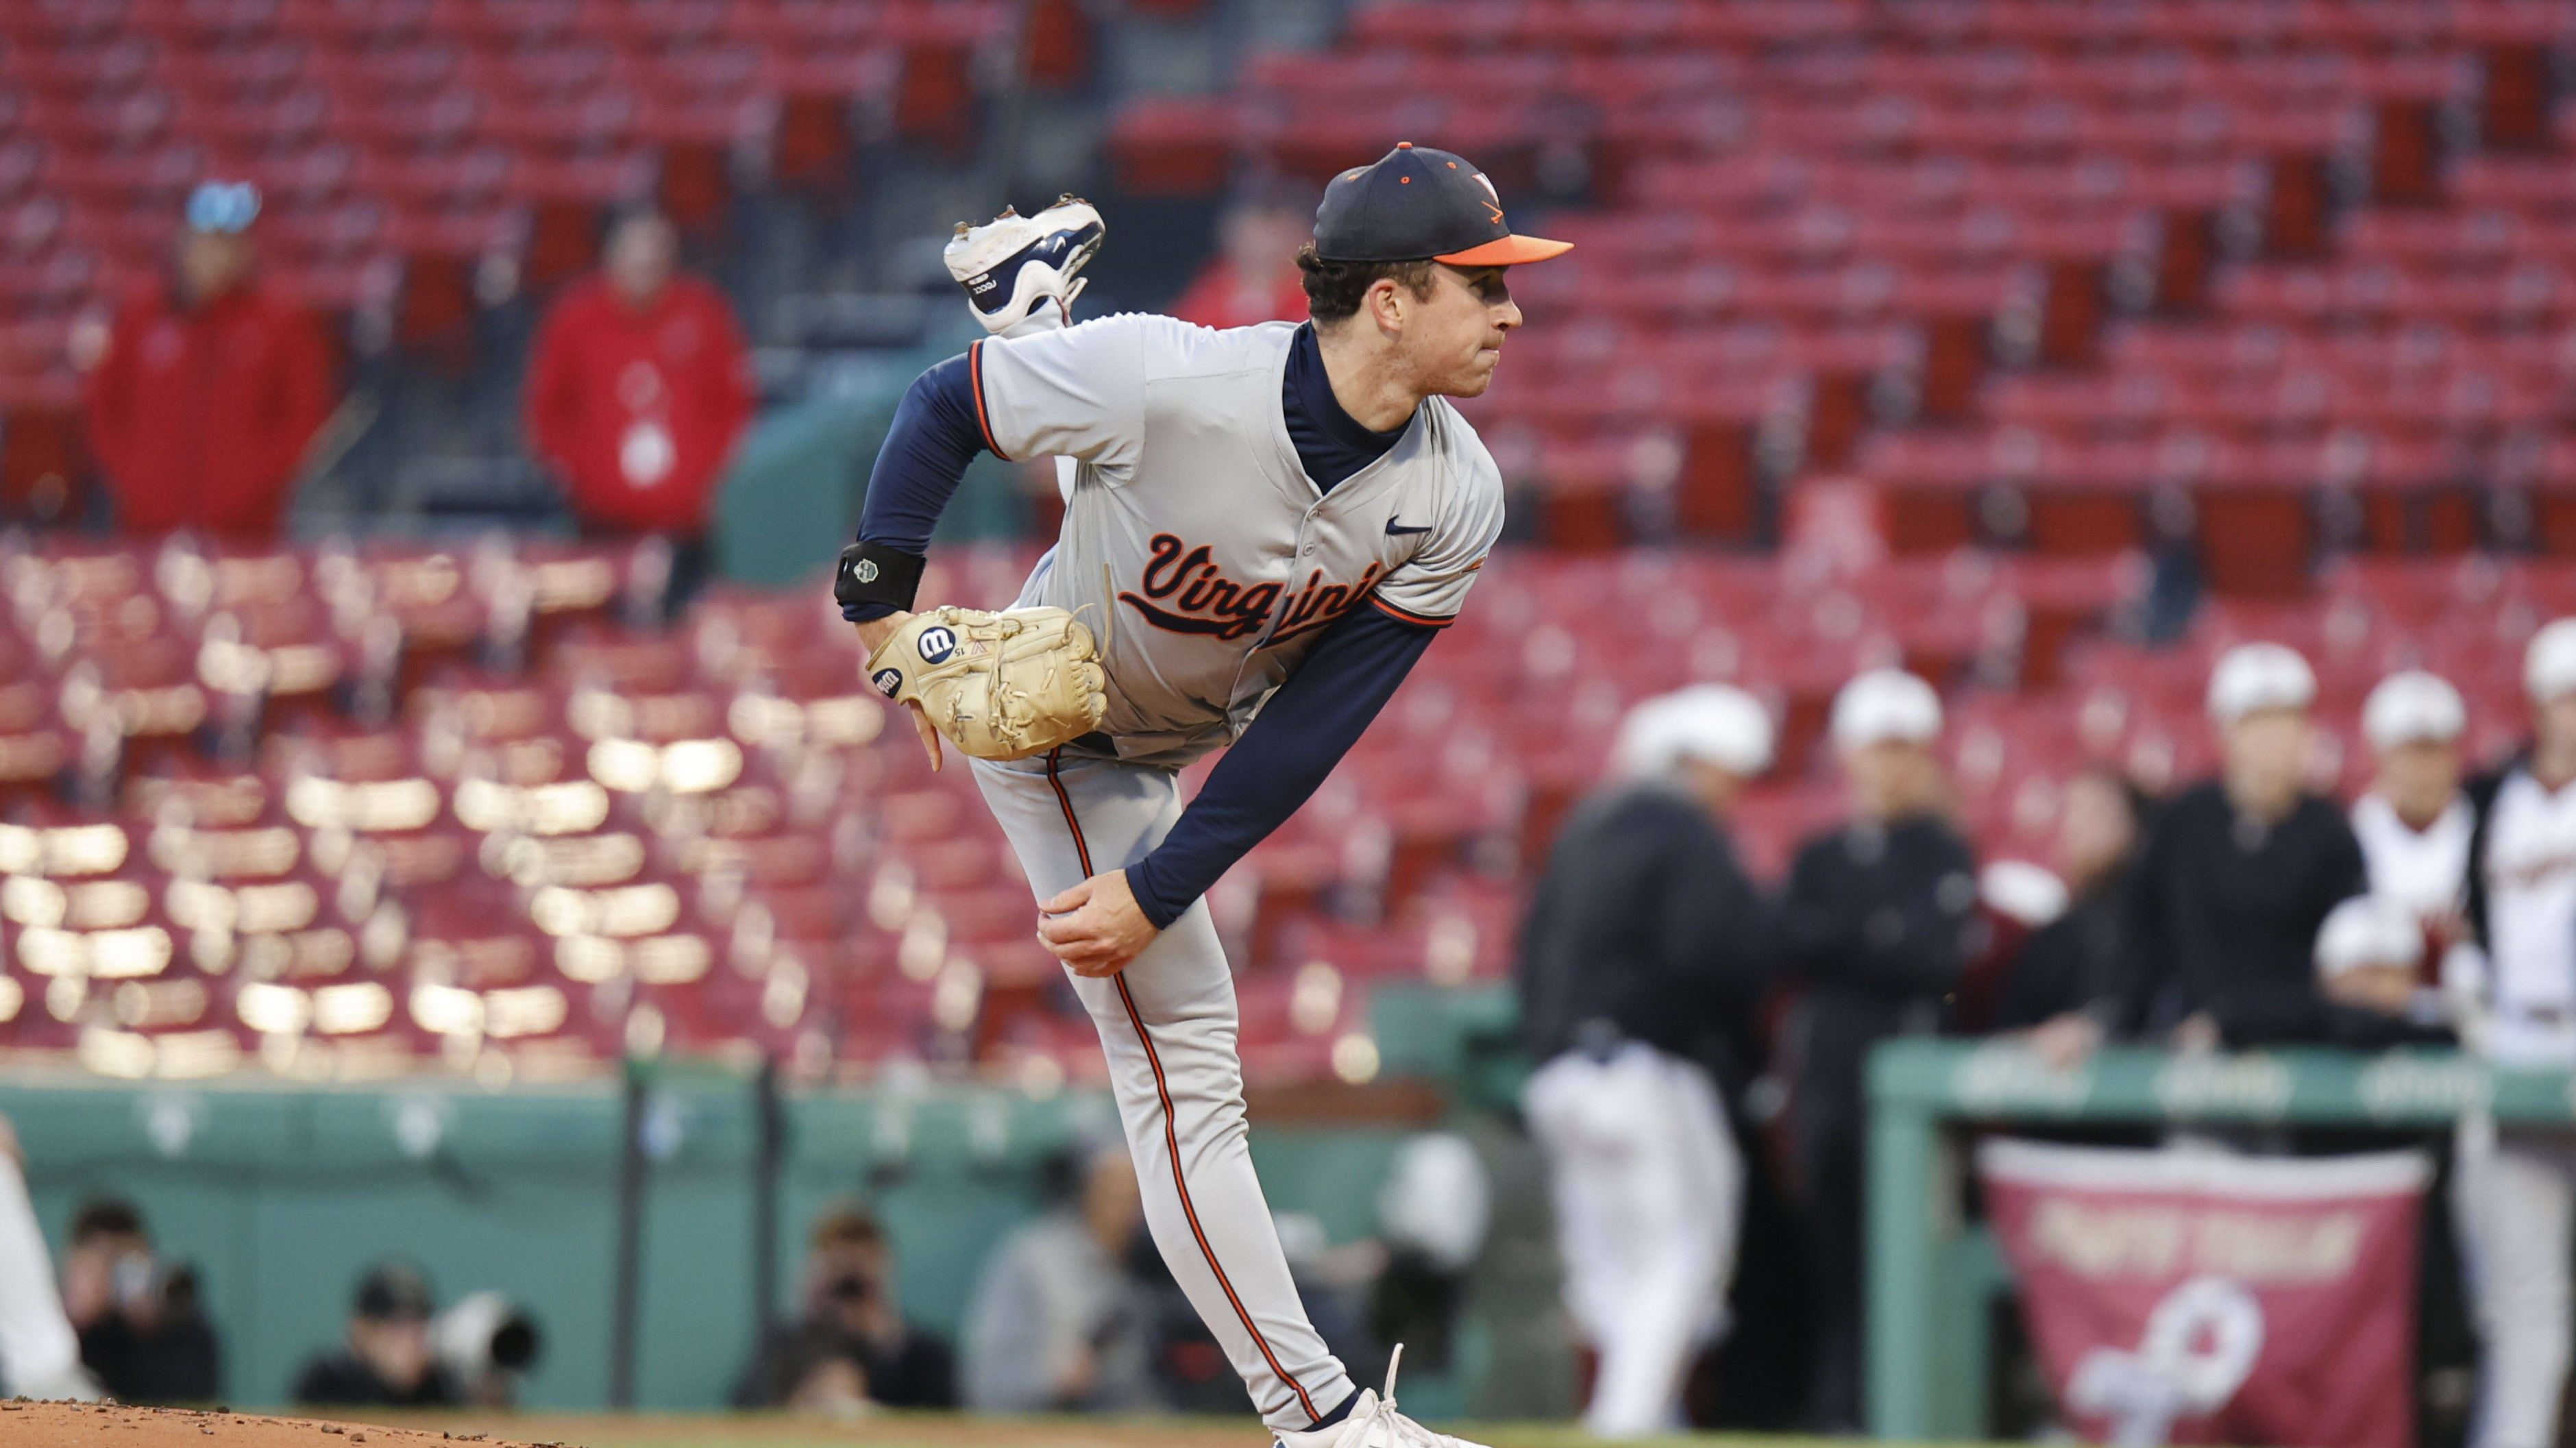 Evan Blanco delivers a pitch during the Virginia baseball game against Boston College at Fenway Park.